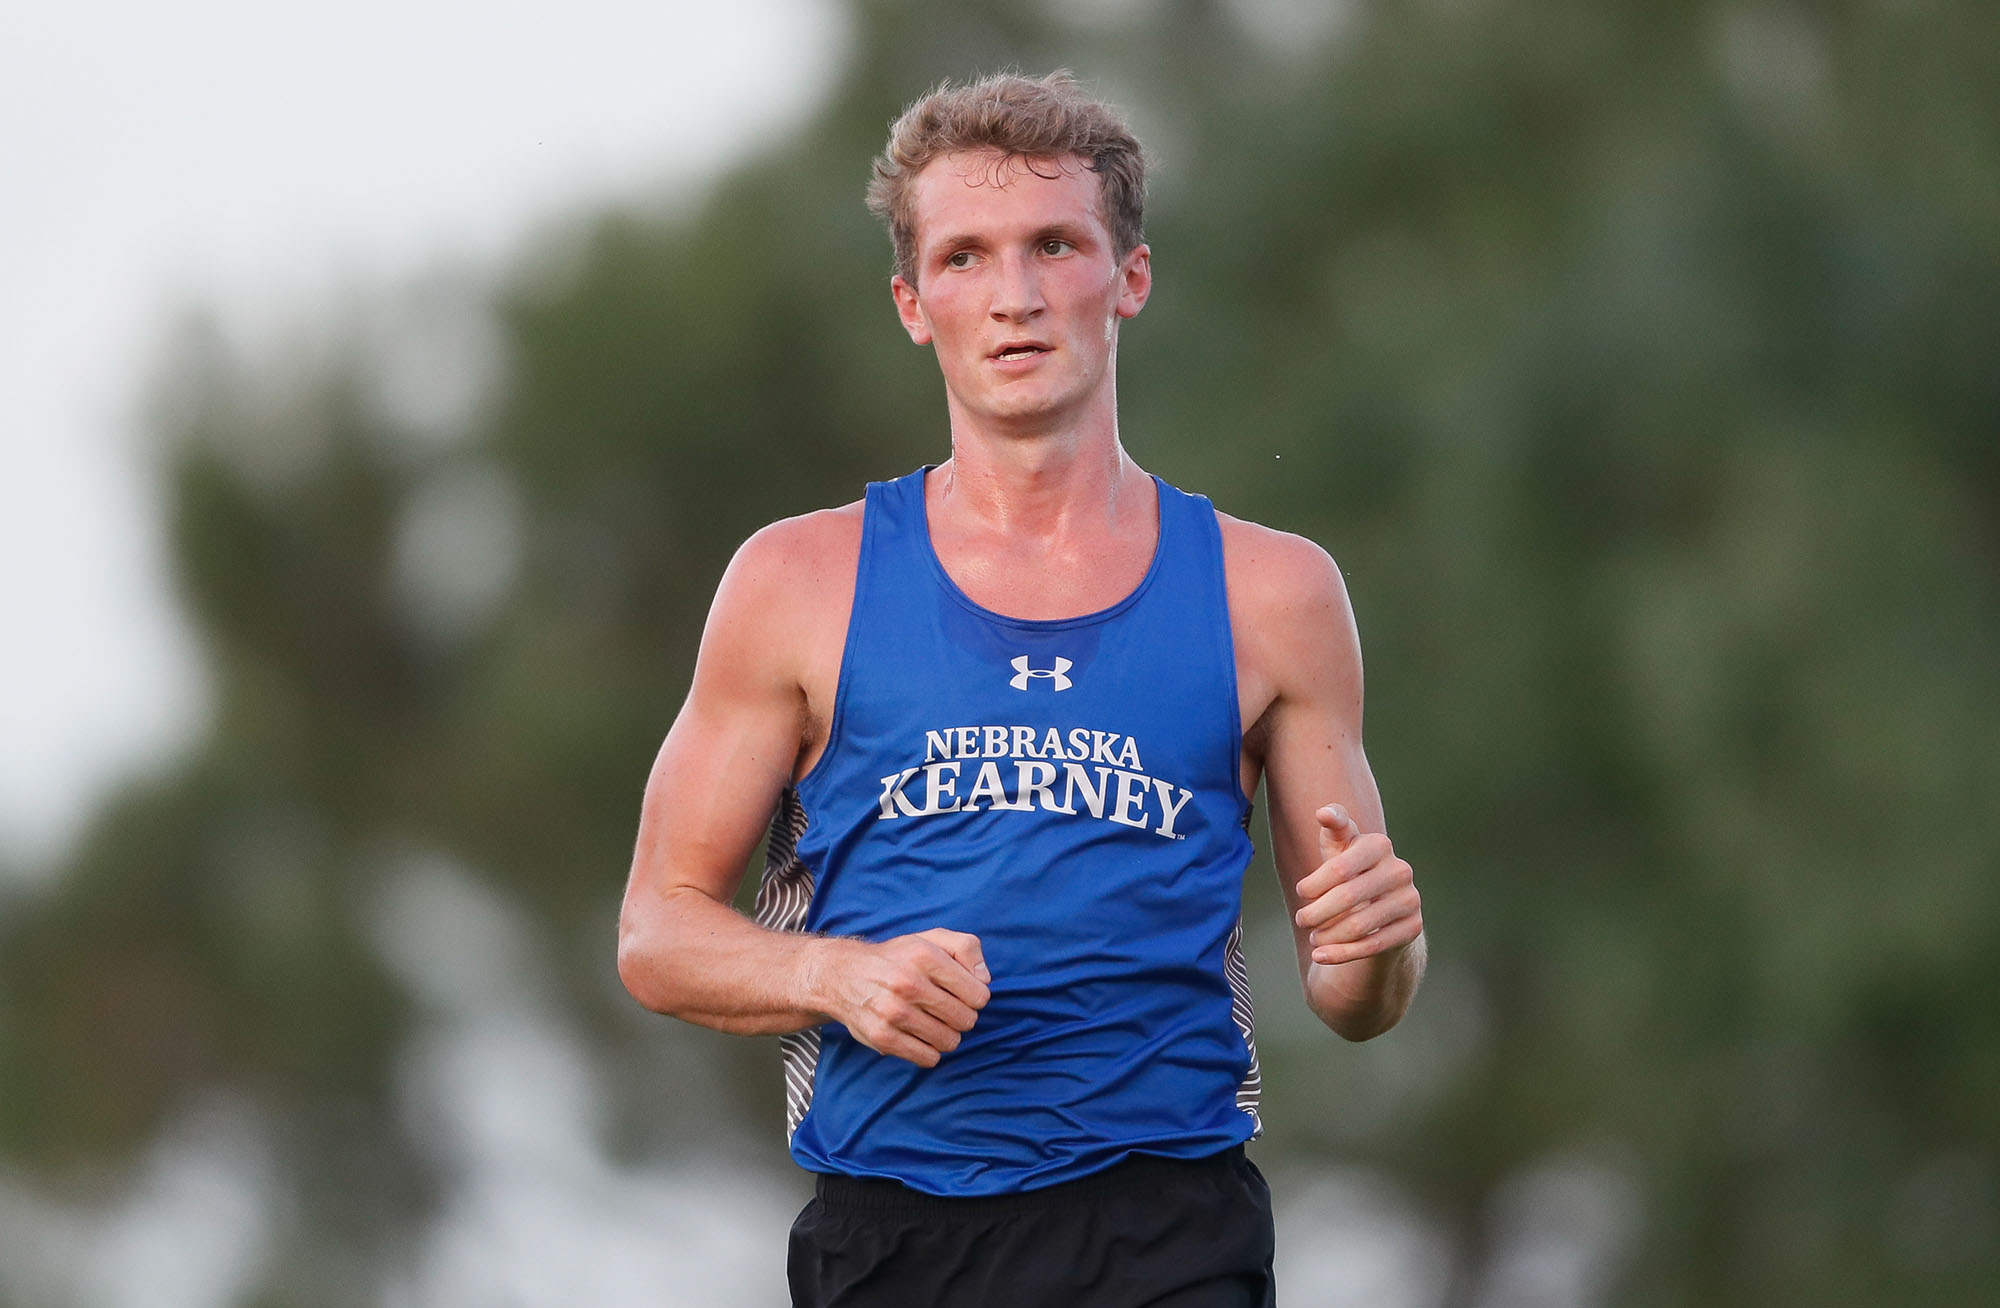 Corbin Hansen, a senior from Deweese, is one of just nine UNK men’s cross country runners to earn NCAA Division II All-American honors. He can become a two-time All-American during the Division II Championships scheduled for Nov. 23 in Sacramento, California.